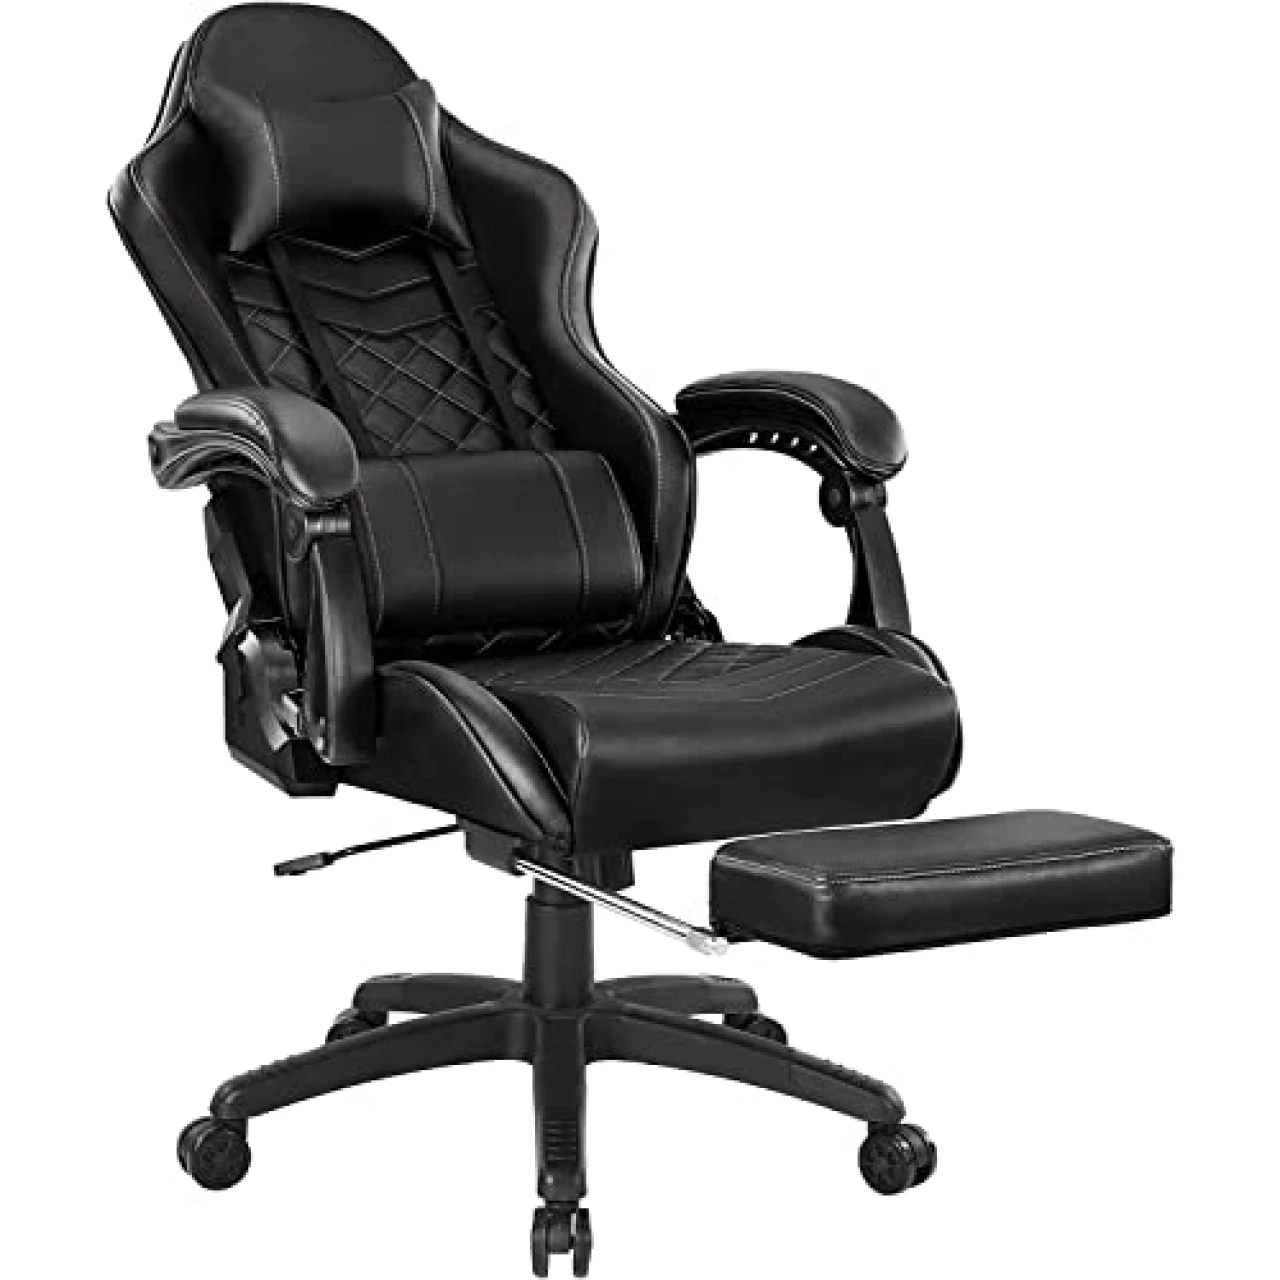 Blue Whale Massage Gaming Chair for Adults, 350LBS Office Chair with Retractable Footrest, Adjustable Armrest, Classic PU Leather Big and Tall Ergonomic Computer Chair